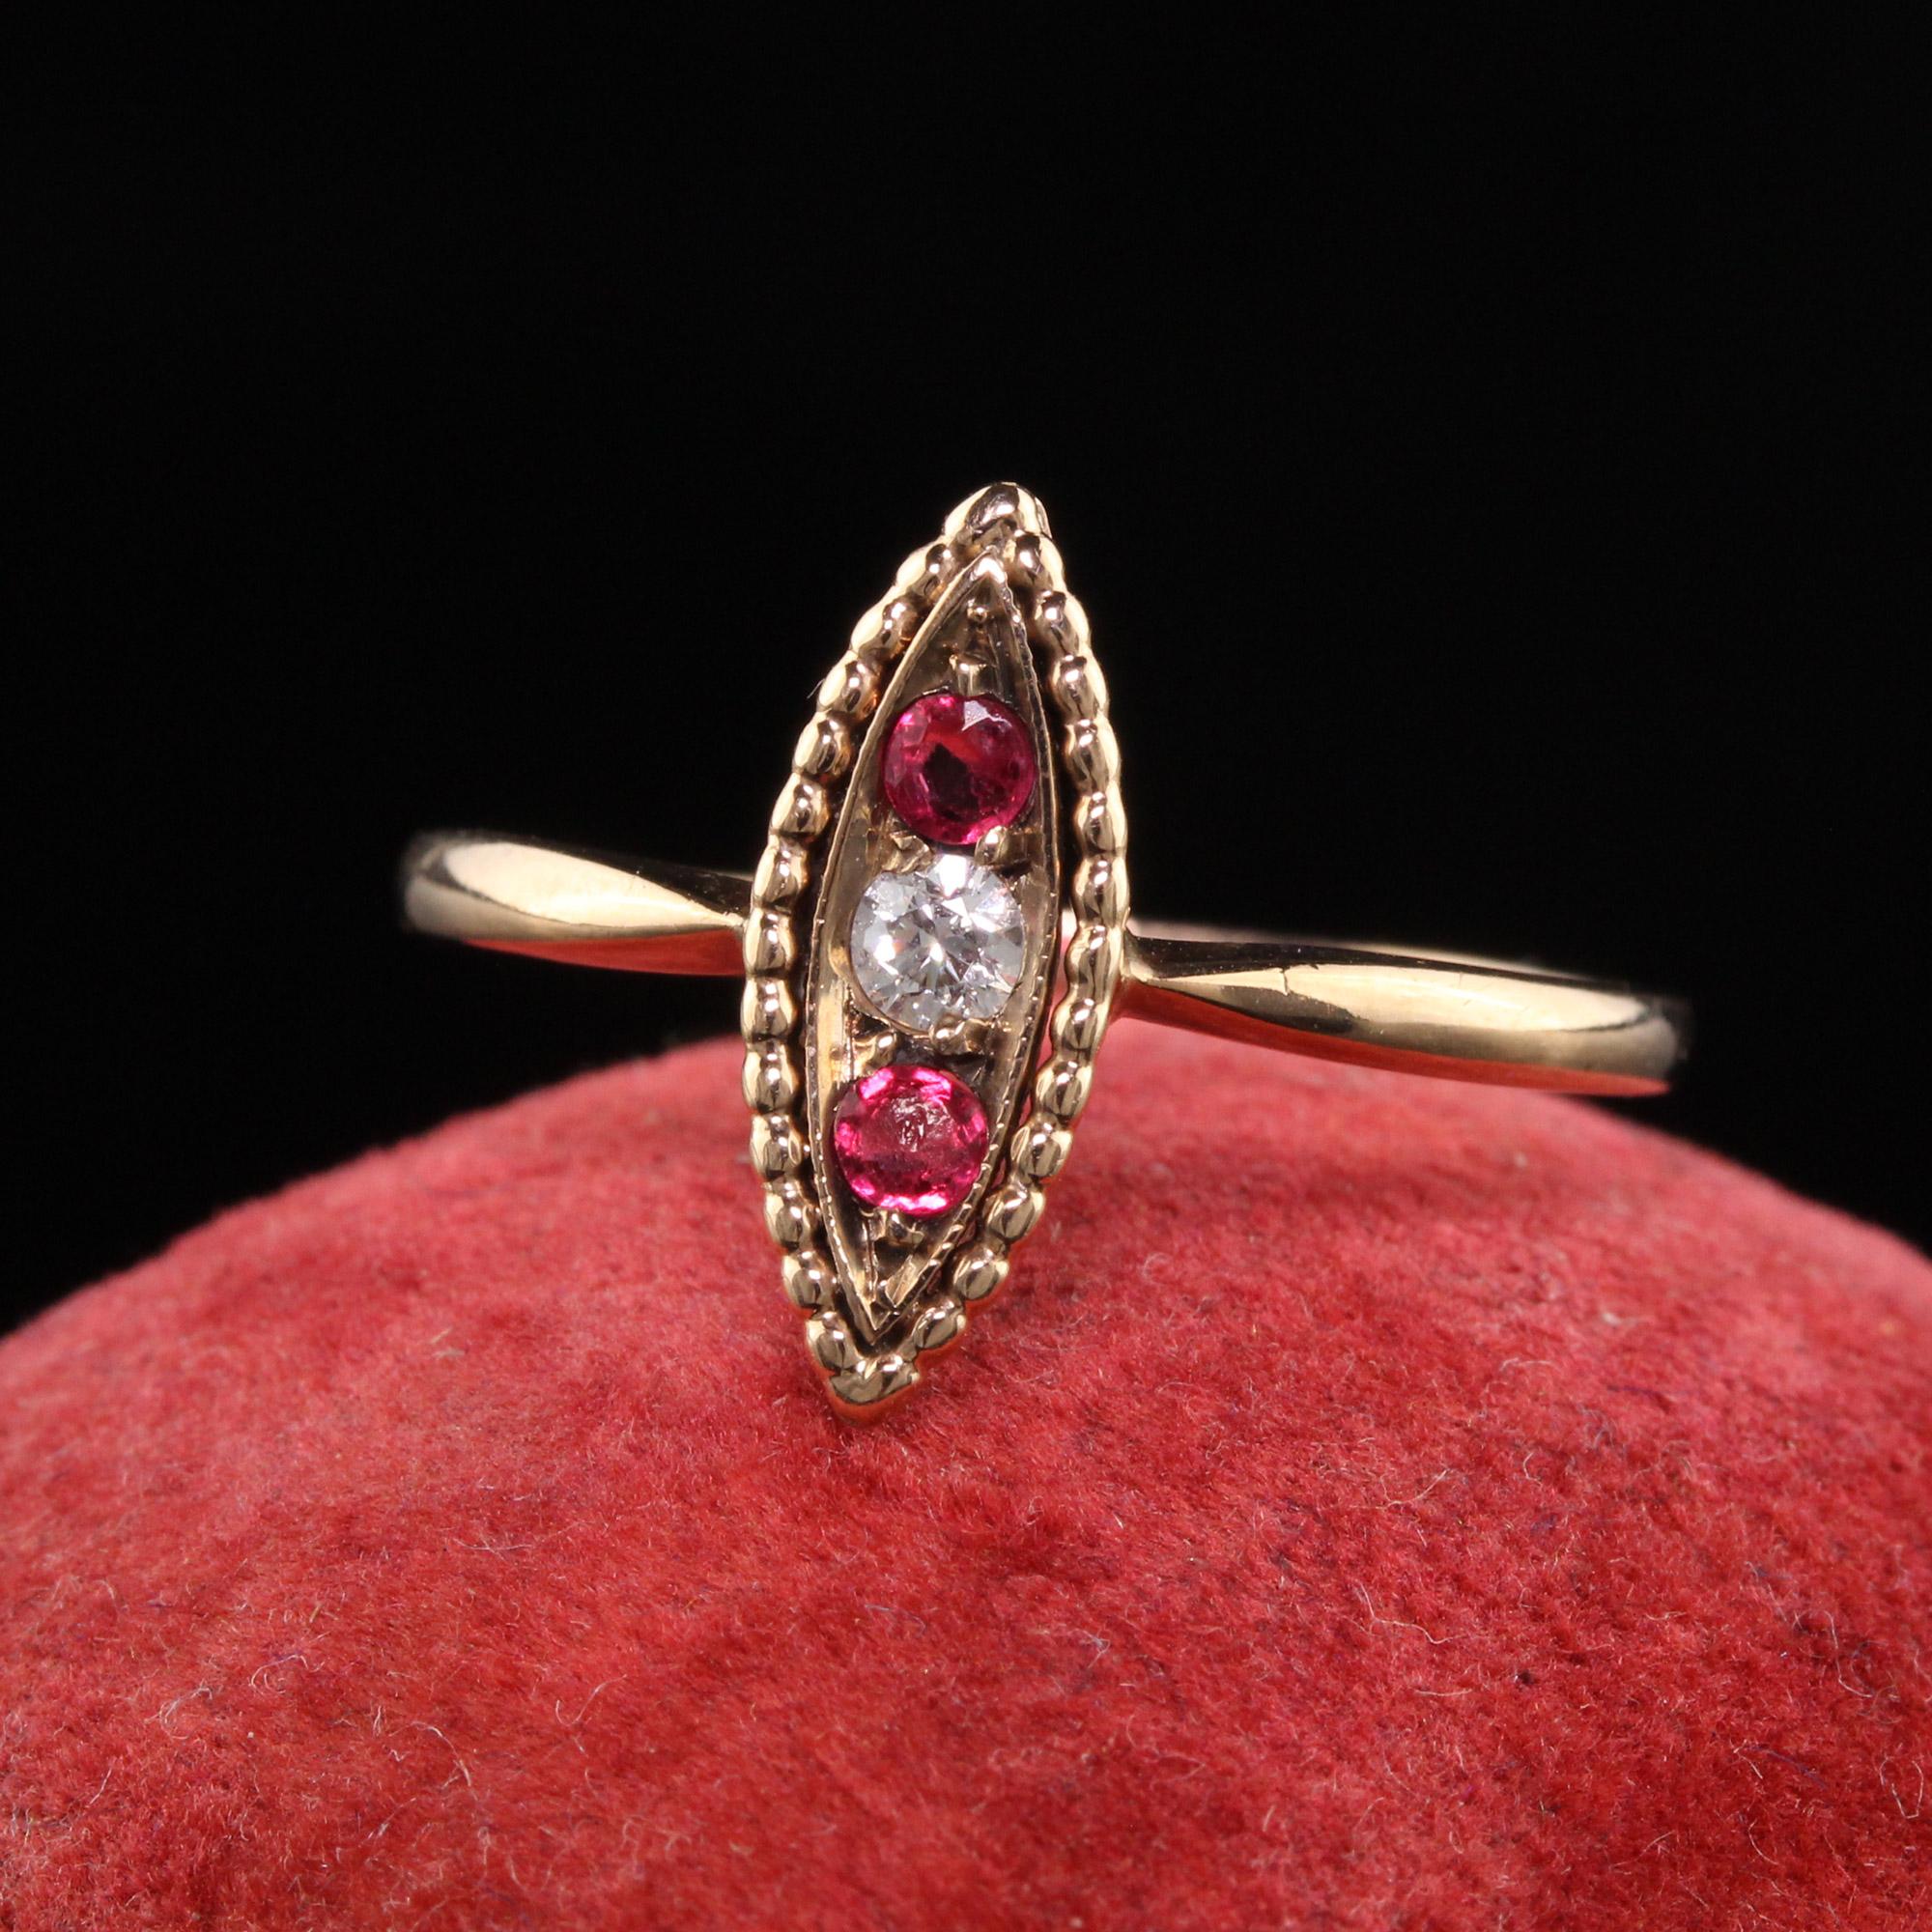 Beautiful Antique Victorian 10K Rose Gold Diamond and Ruby Navette Ring. This pretty dainty ring has a white diamond in the center with a ruby on top and below it. The sides have beautiful filigree work and is in great condition.

Item